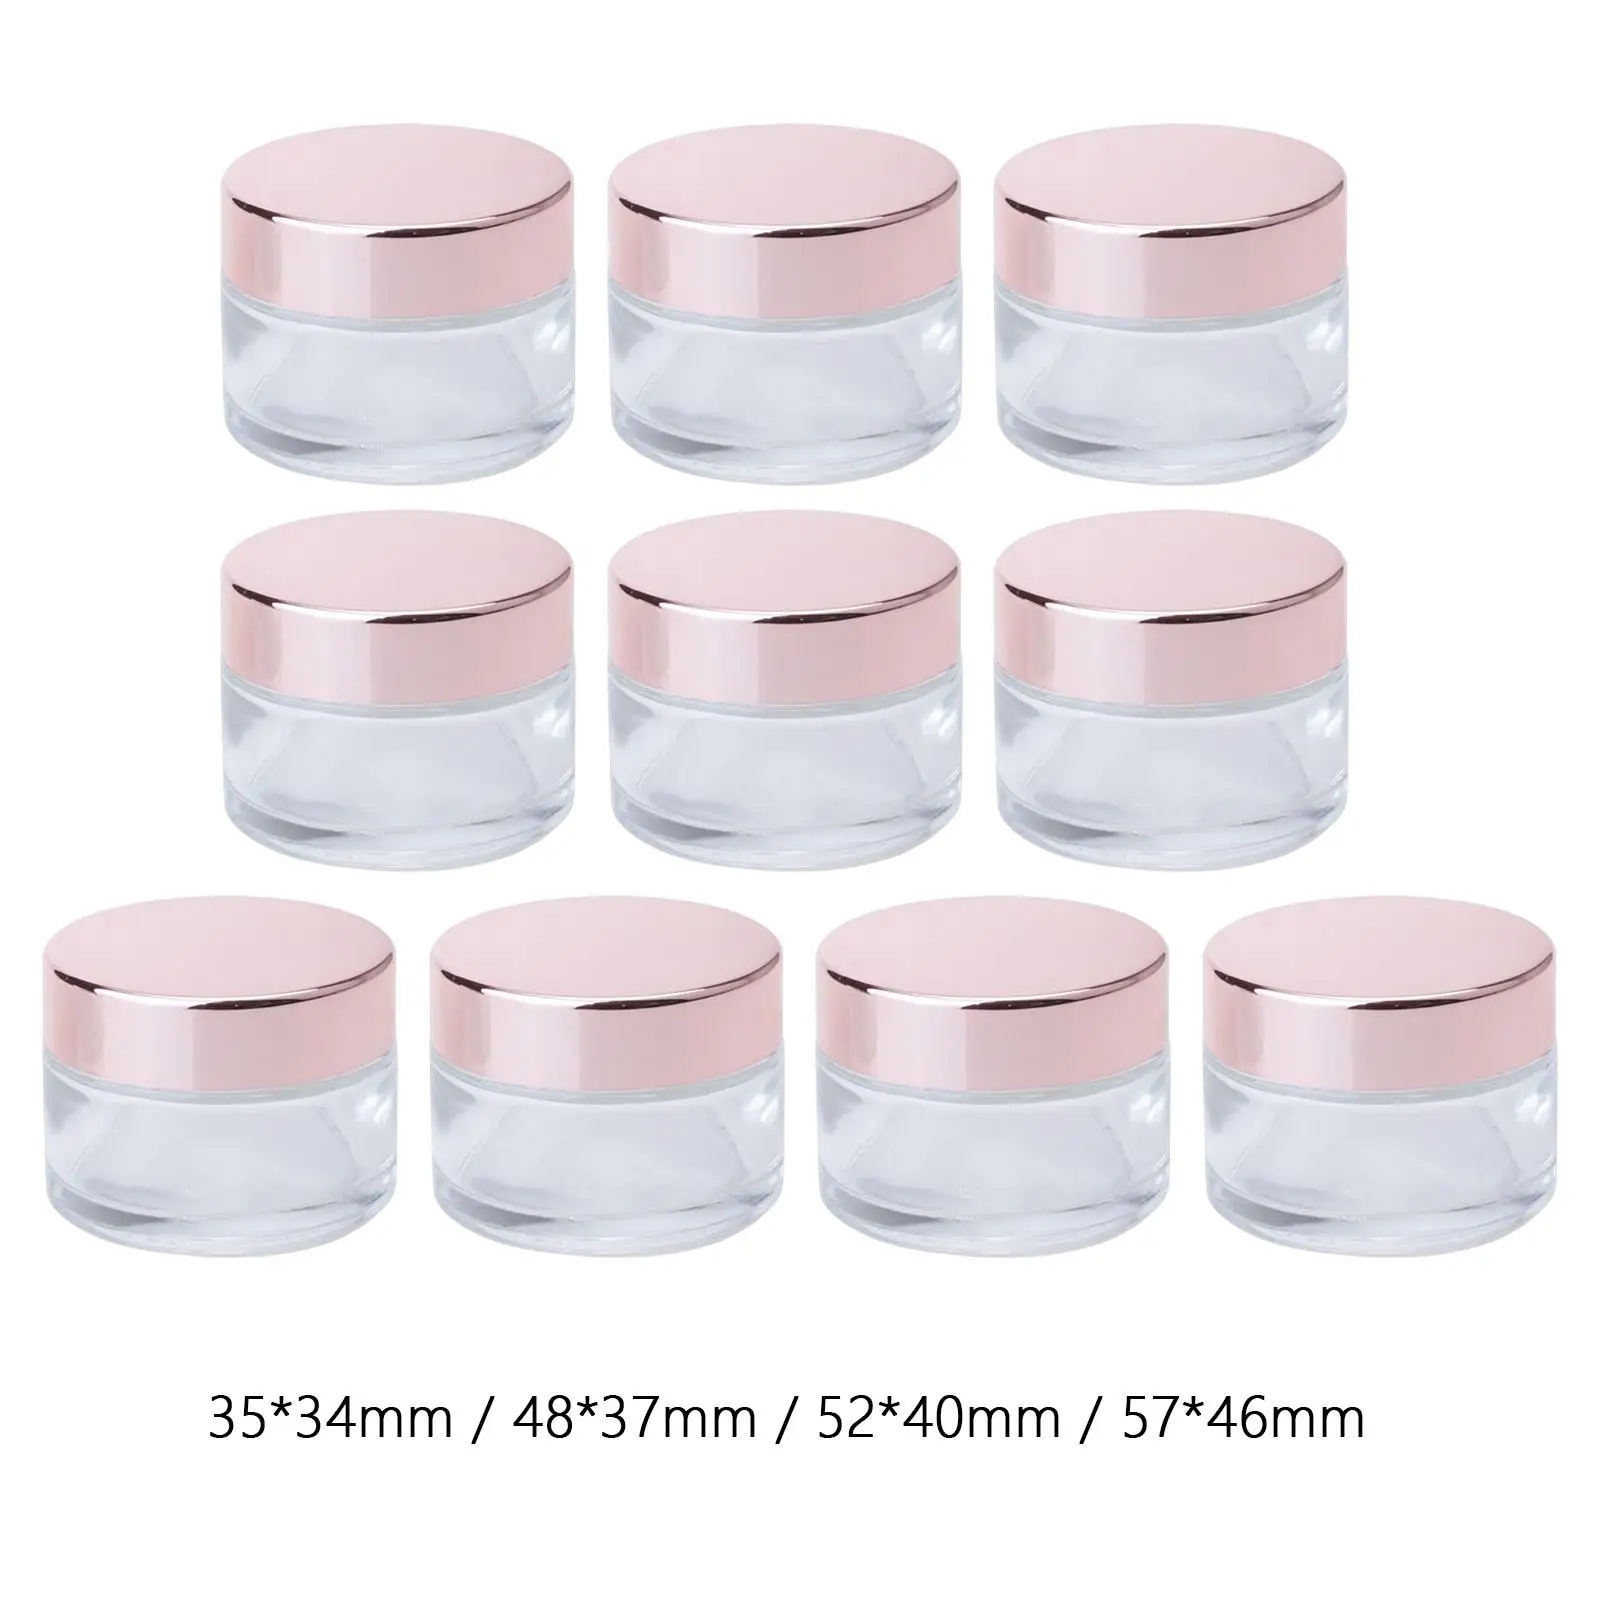 

10Pcs Empty Cosmetic Containers Glass Cream Jars Vials Makeup Sample Empty Container for Creams and Gels Moisturizer